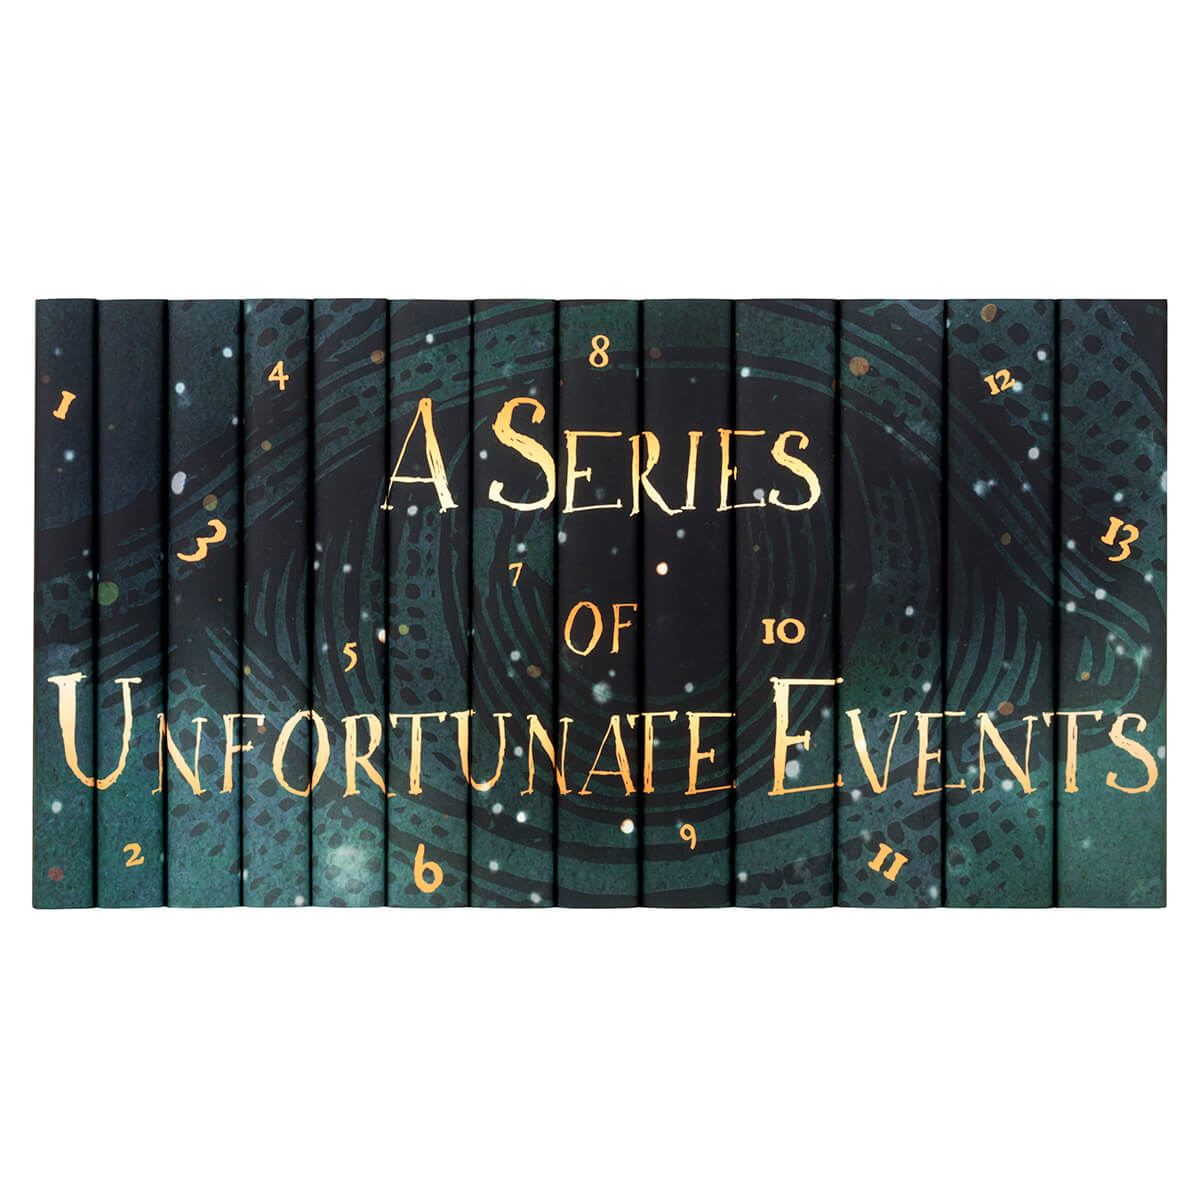 Customized Lemony Snicket's A Series of Unfortunate Events